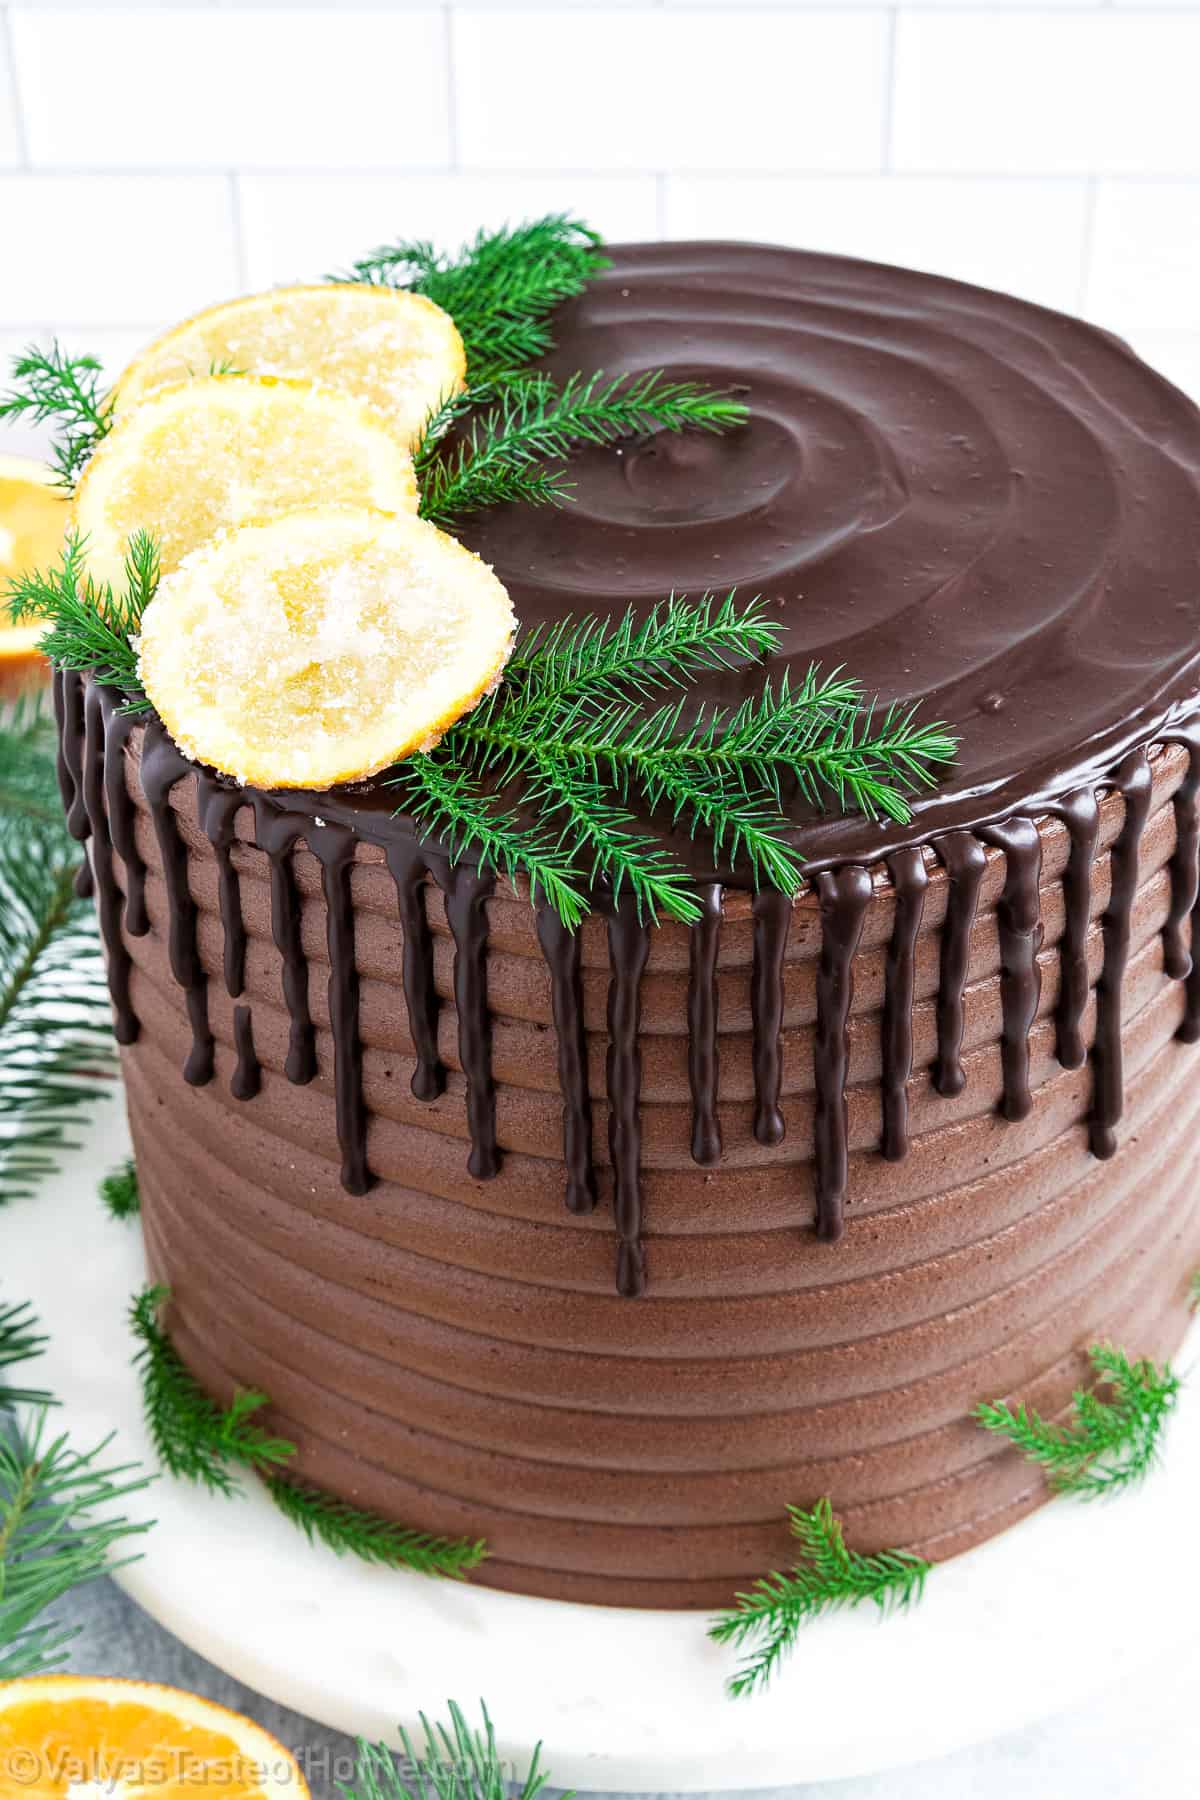 The combination of chocolate and orange will leave you licking your fingers!